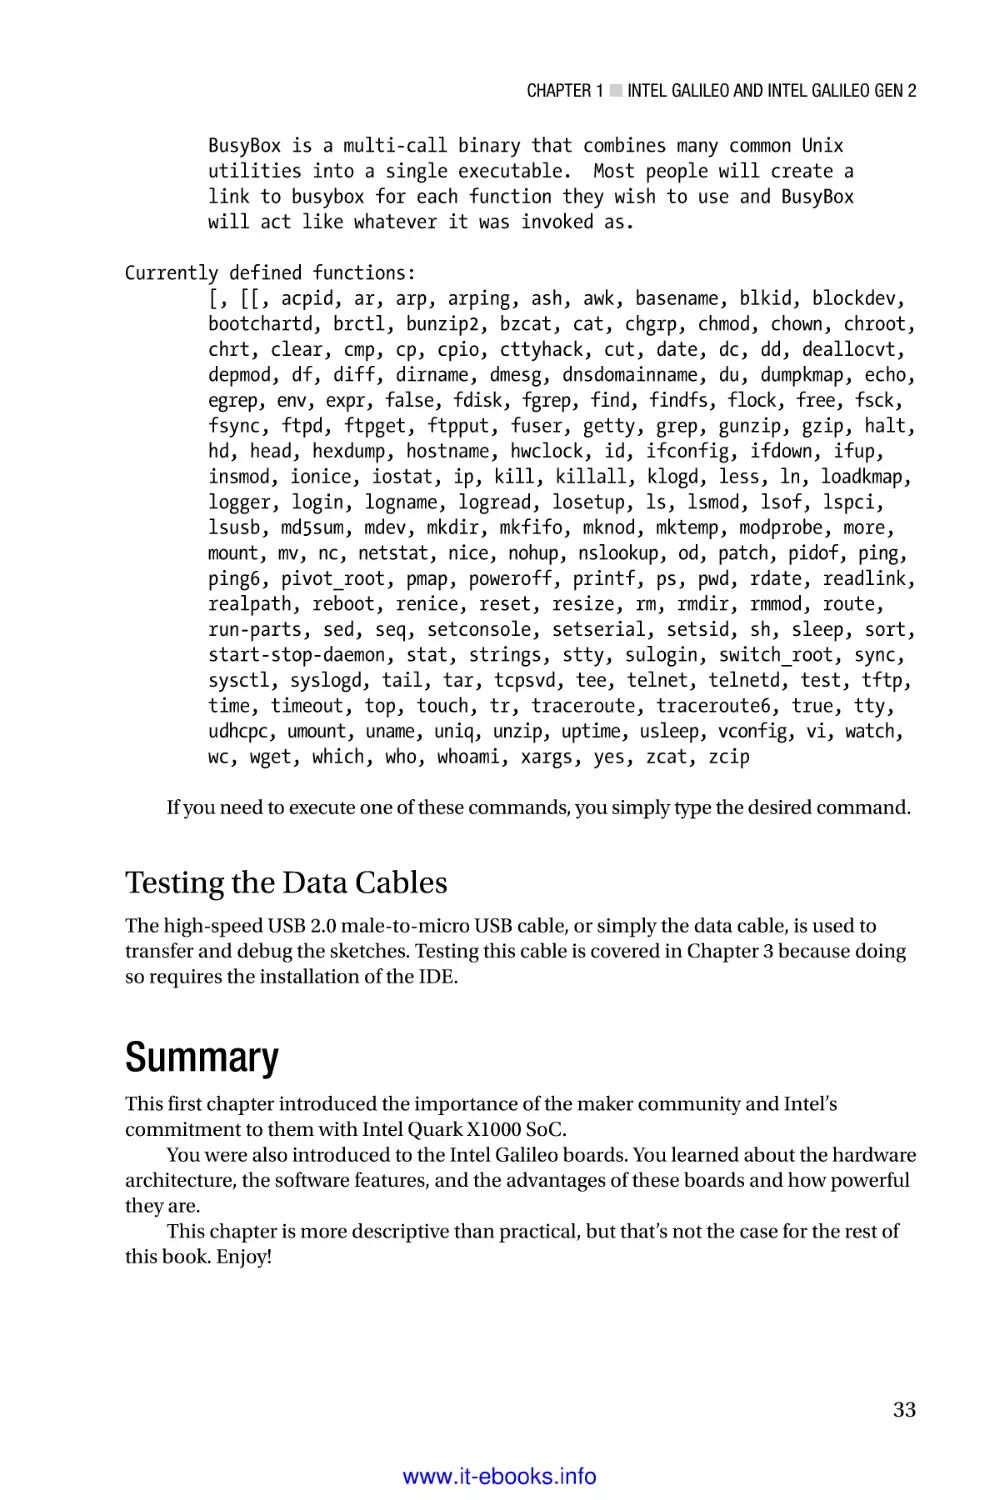 Testing the Data Cables
Summary